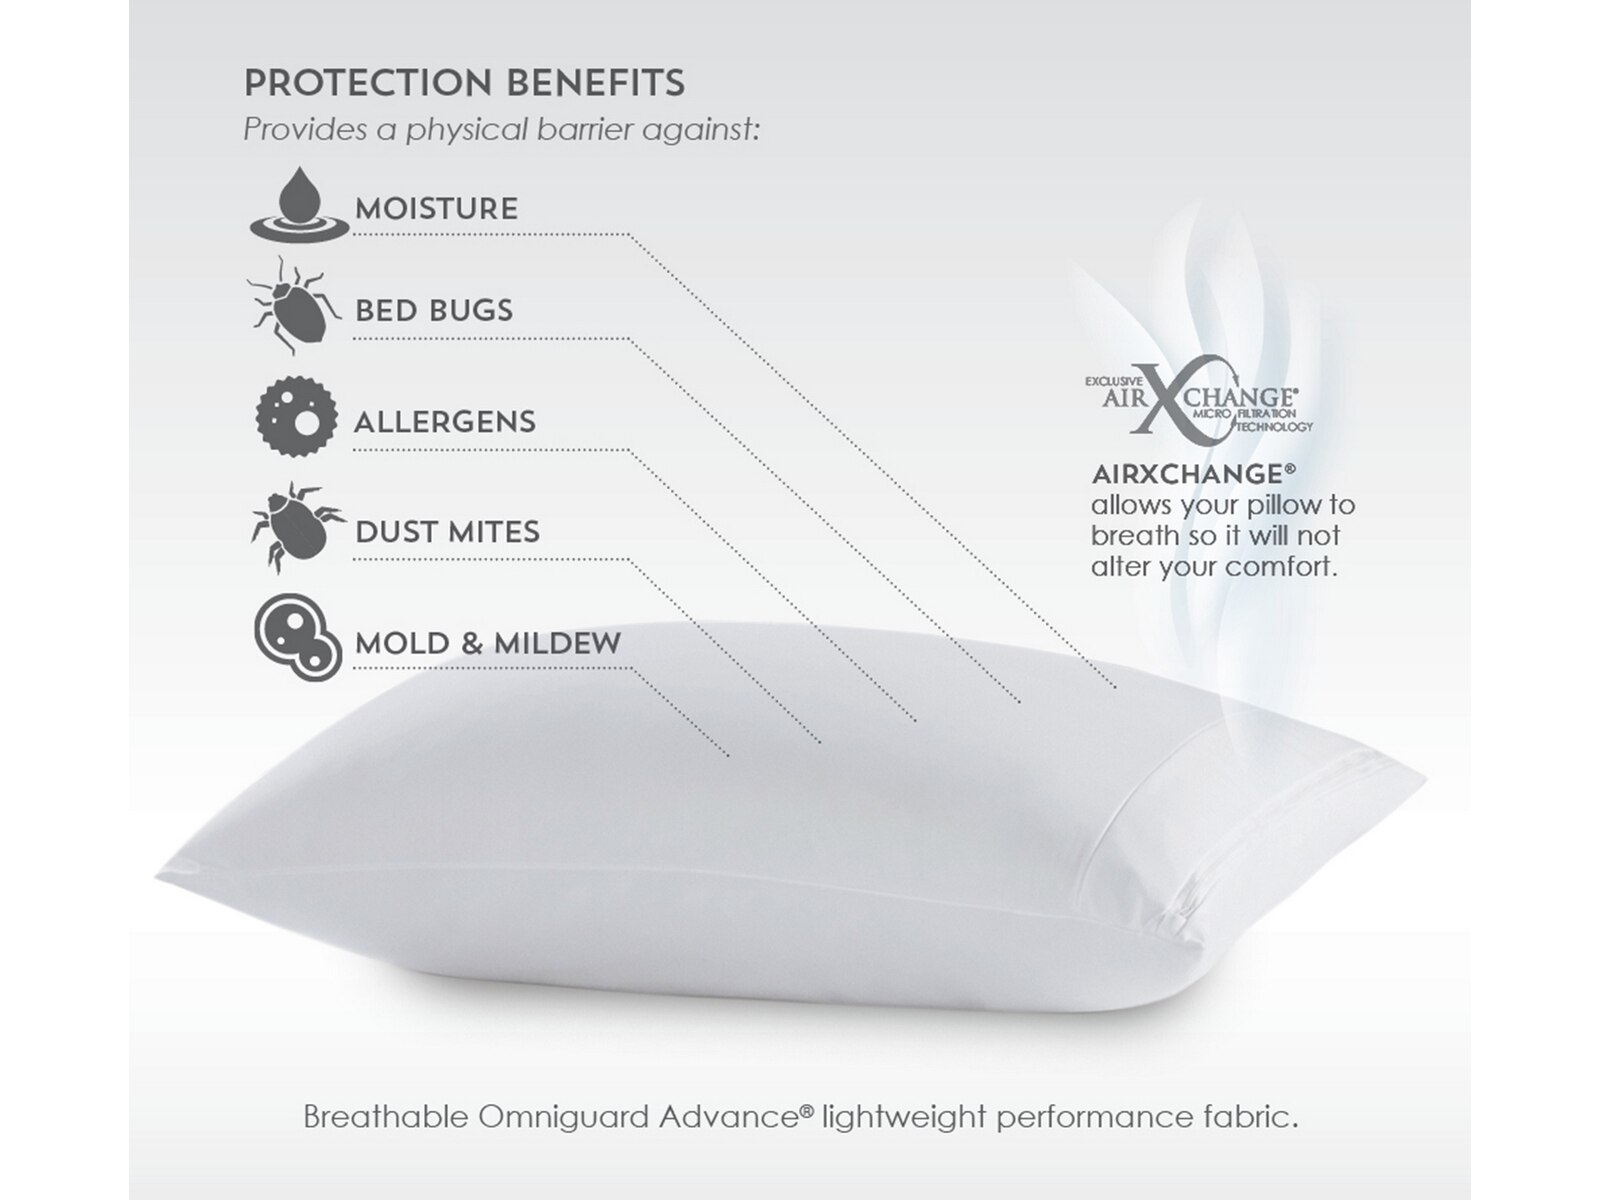 frio rapid chill mattress protector reviews